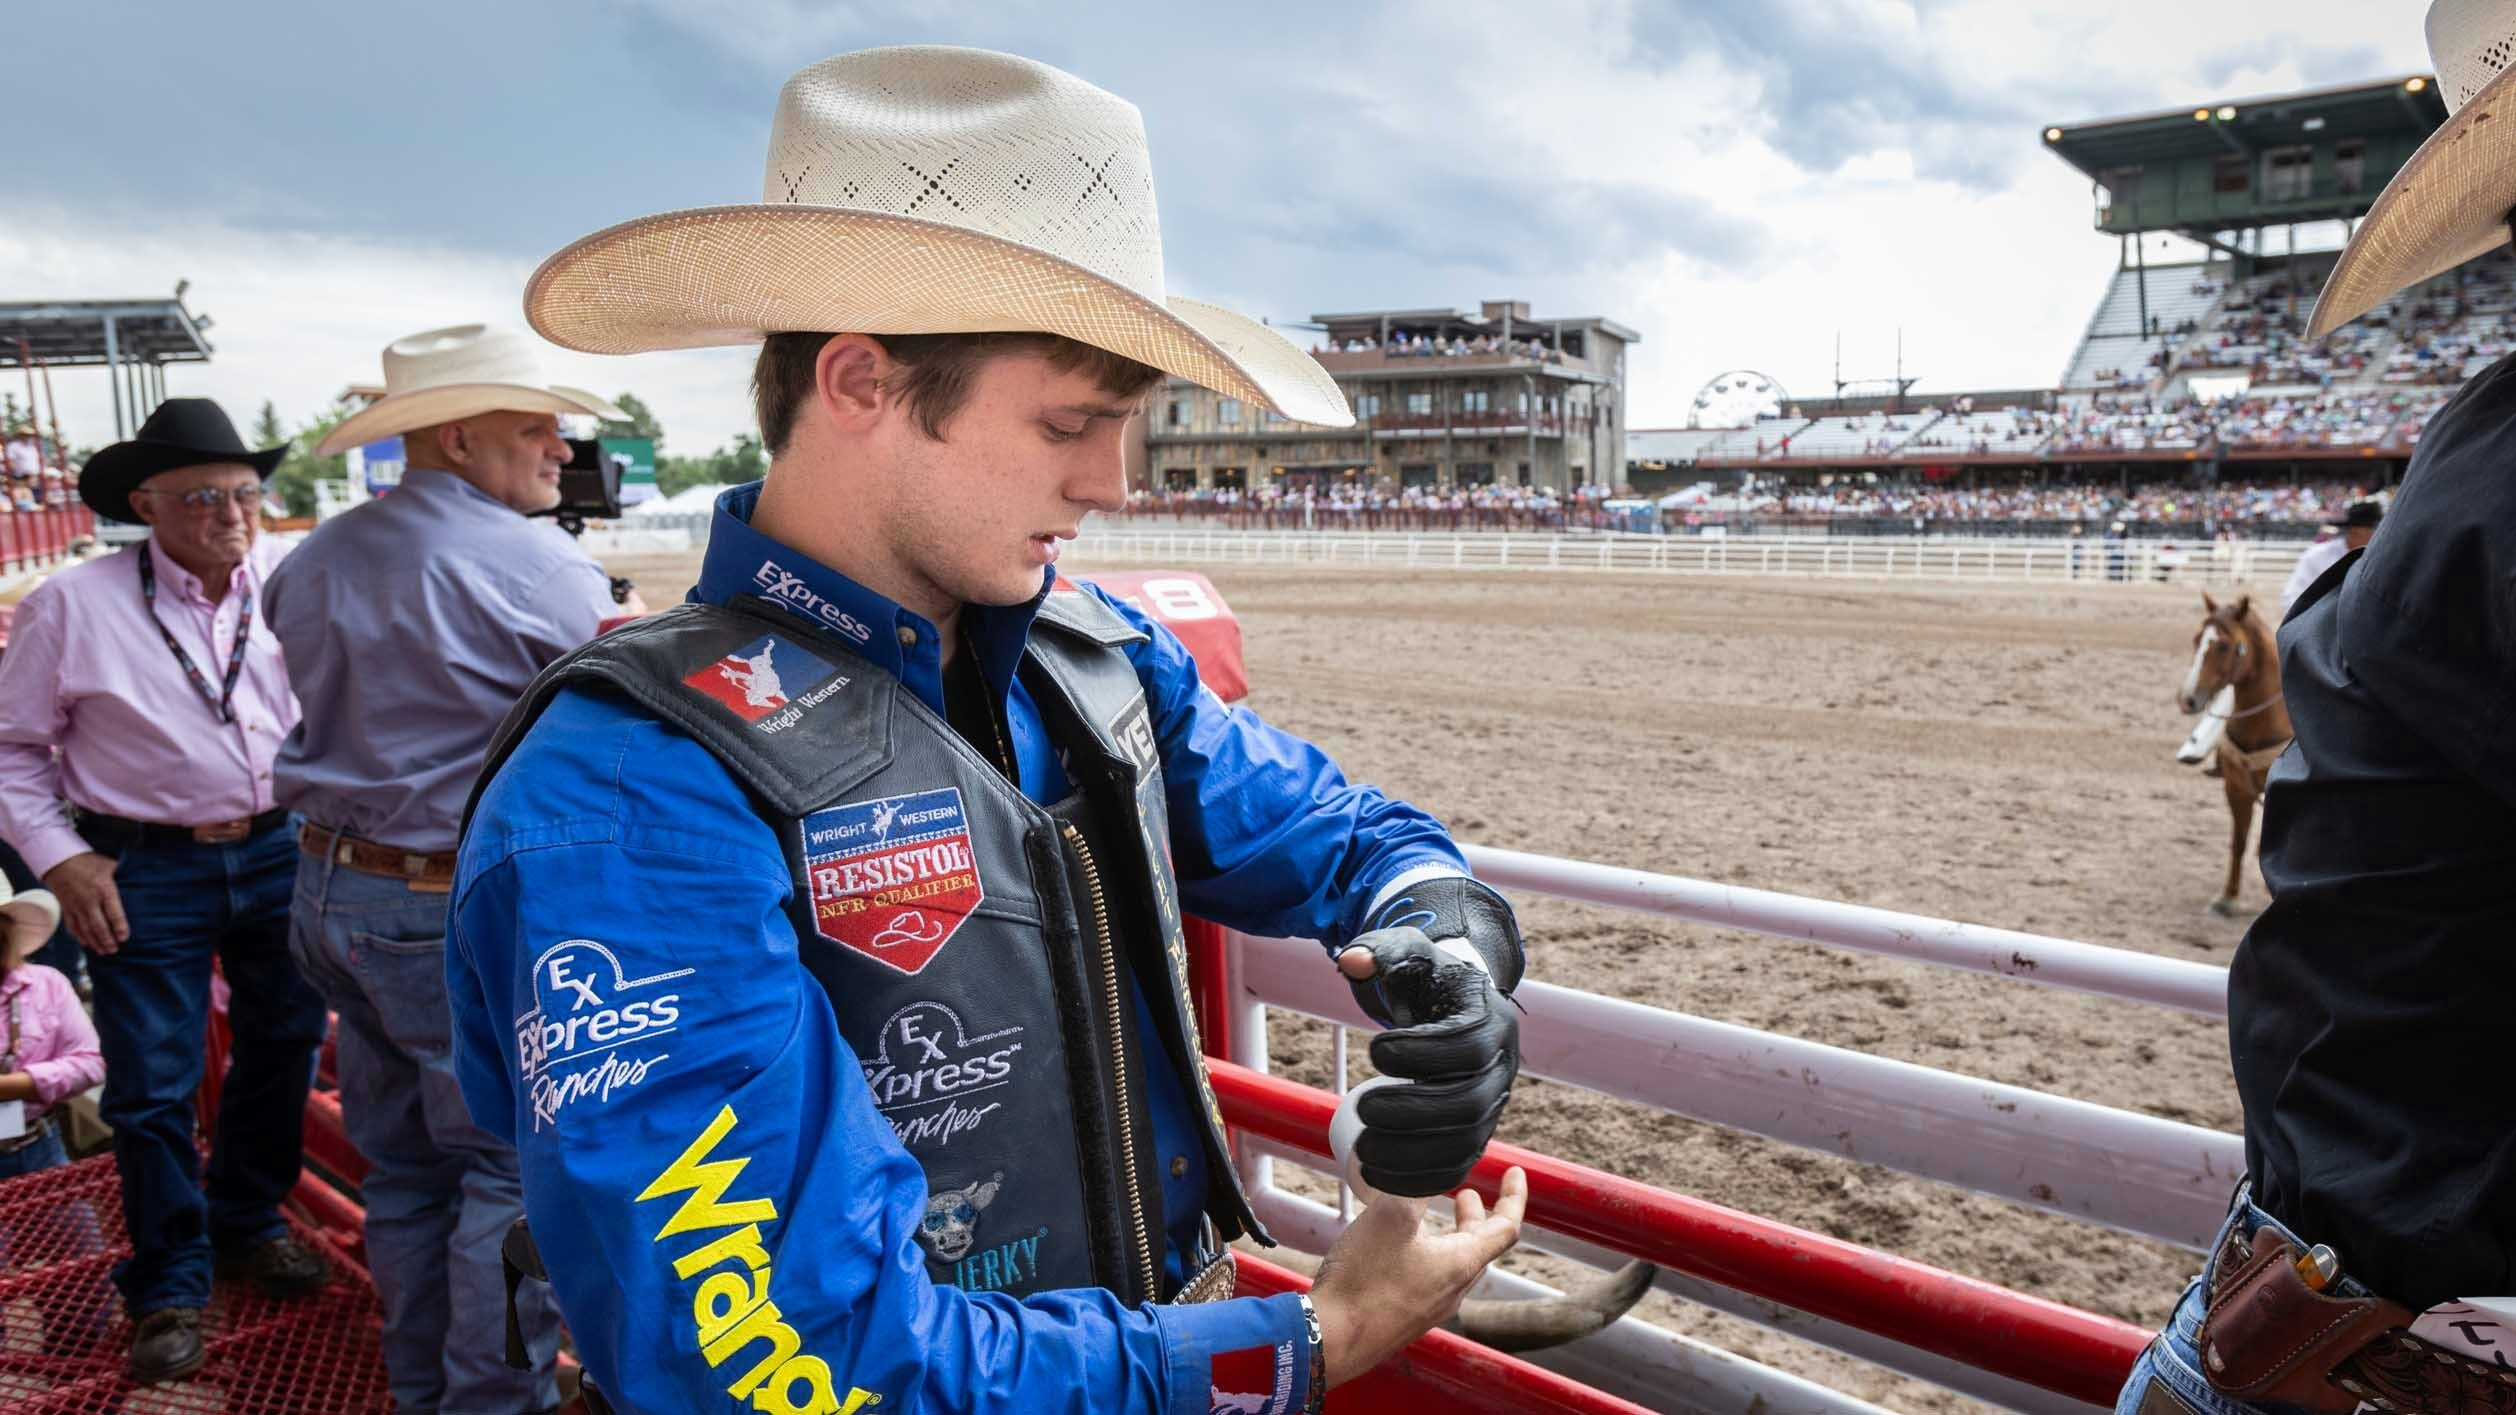 Stetson Wright from Milford, UT gets ready to ride his bull in the Bull Riding at Cheyenne Frontier Days on July 27, 2023.